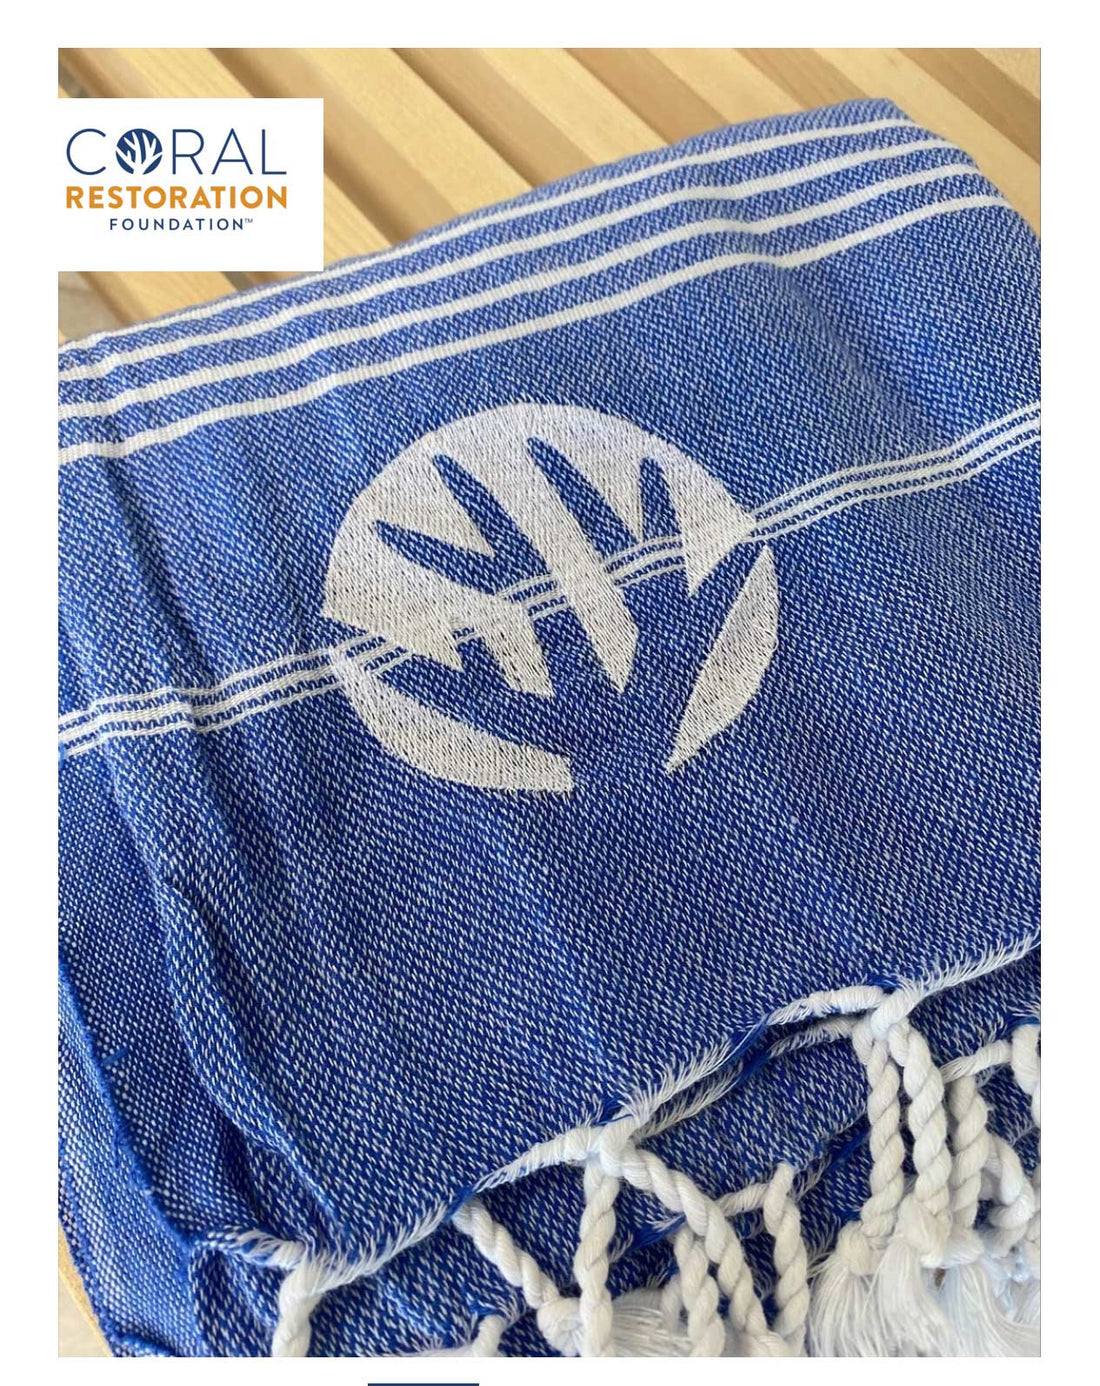 Help Support The Coral Restoration Foundation of the Florida Keys - The Riviera Towel Company